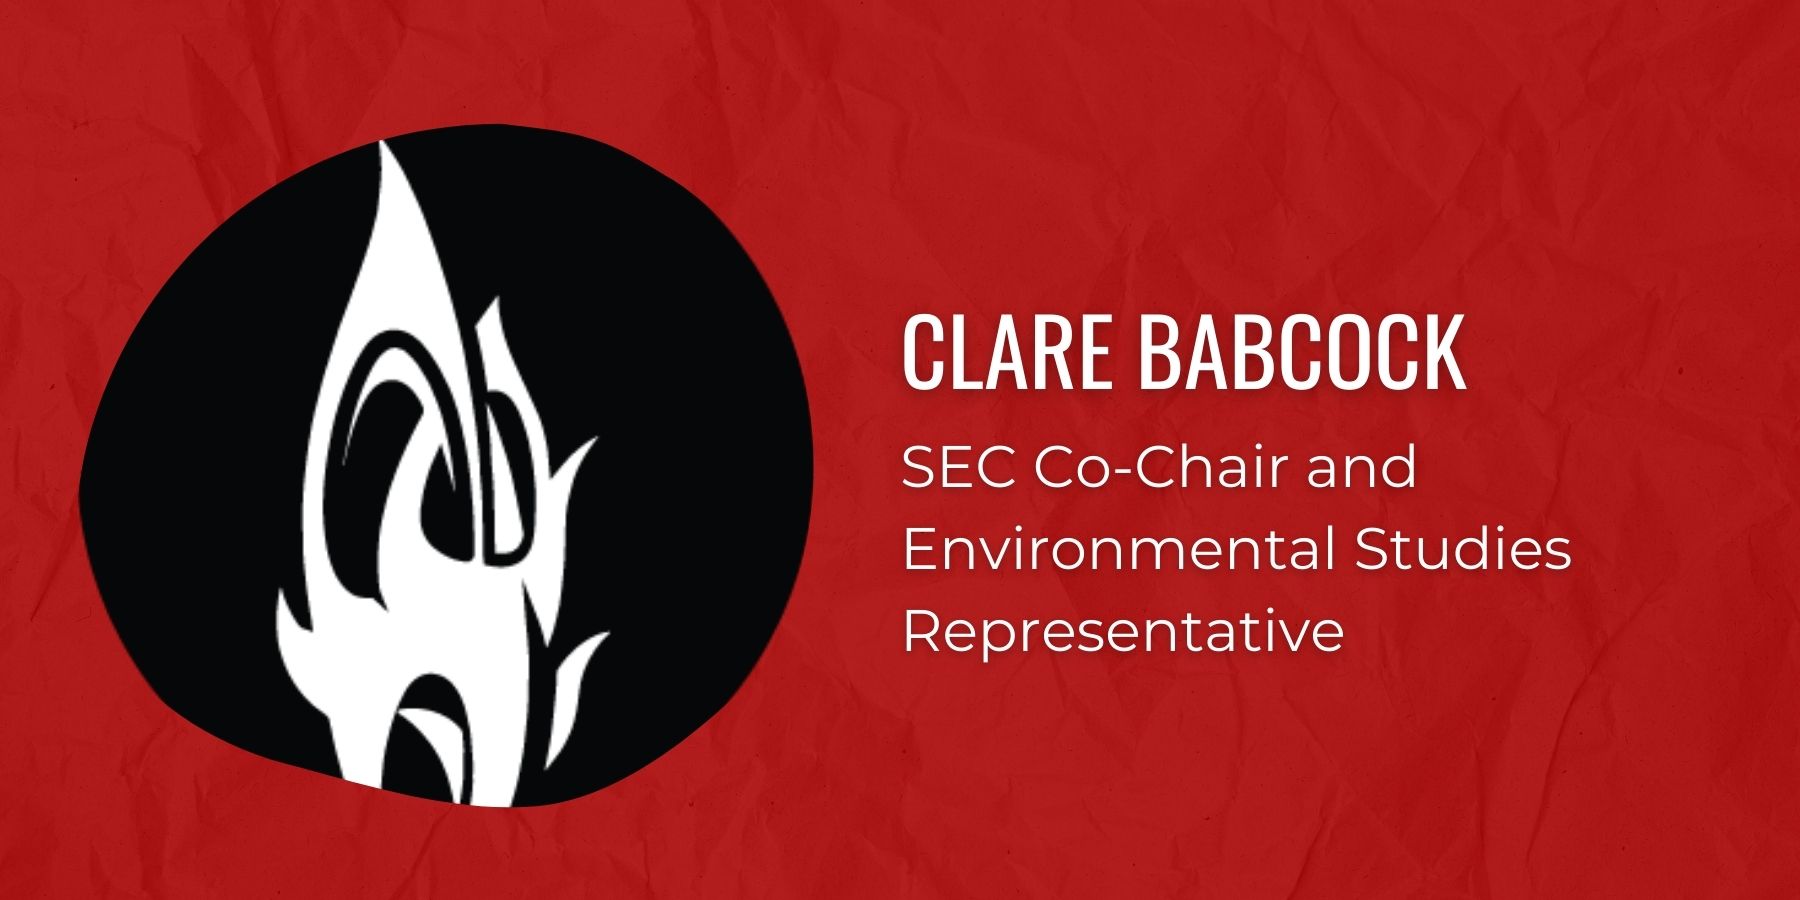 Image of Claire Babcock with text: SEC Co-Chair and Environmental Studies Representative